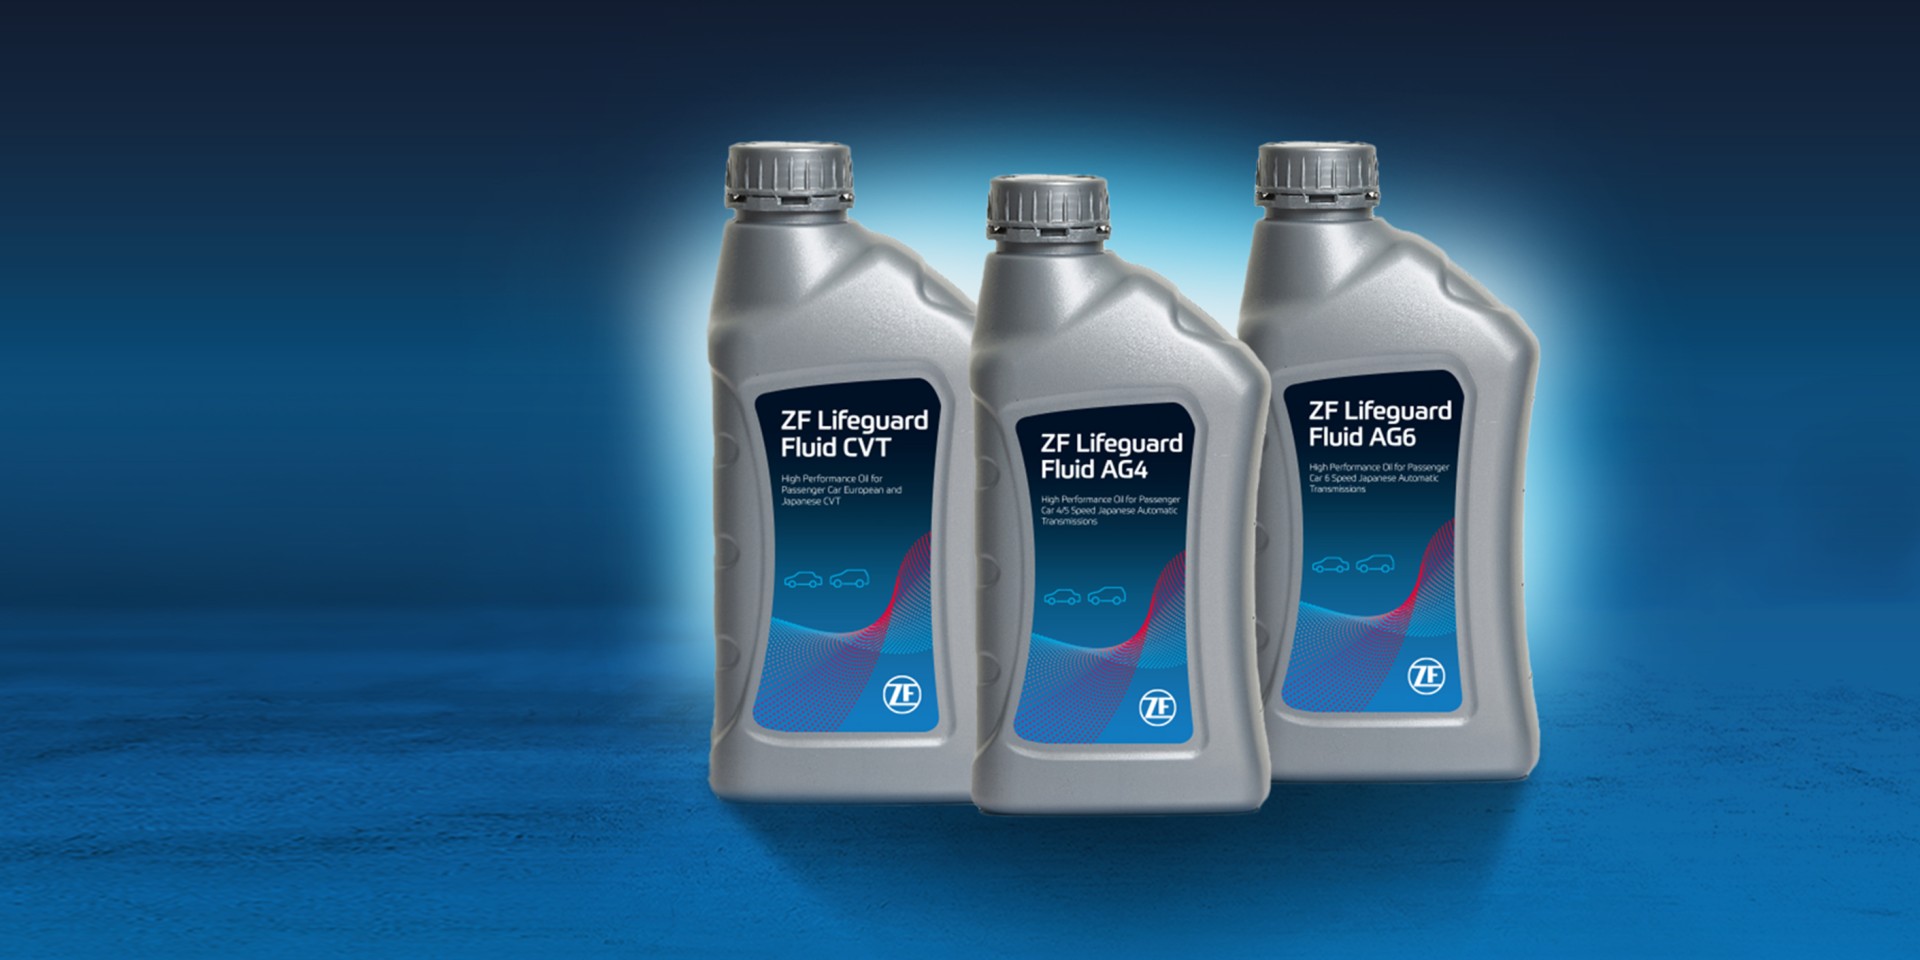 bottles of lifguard fluid in front of blue background